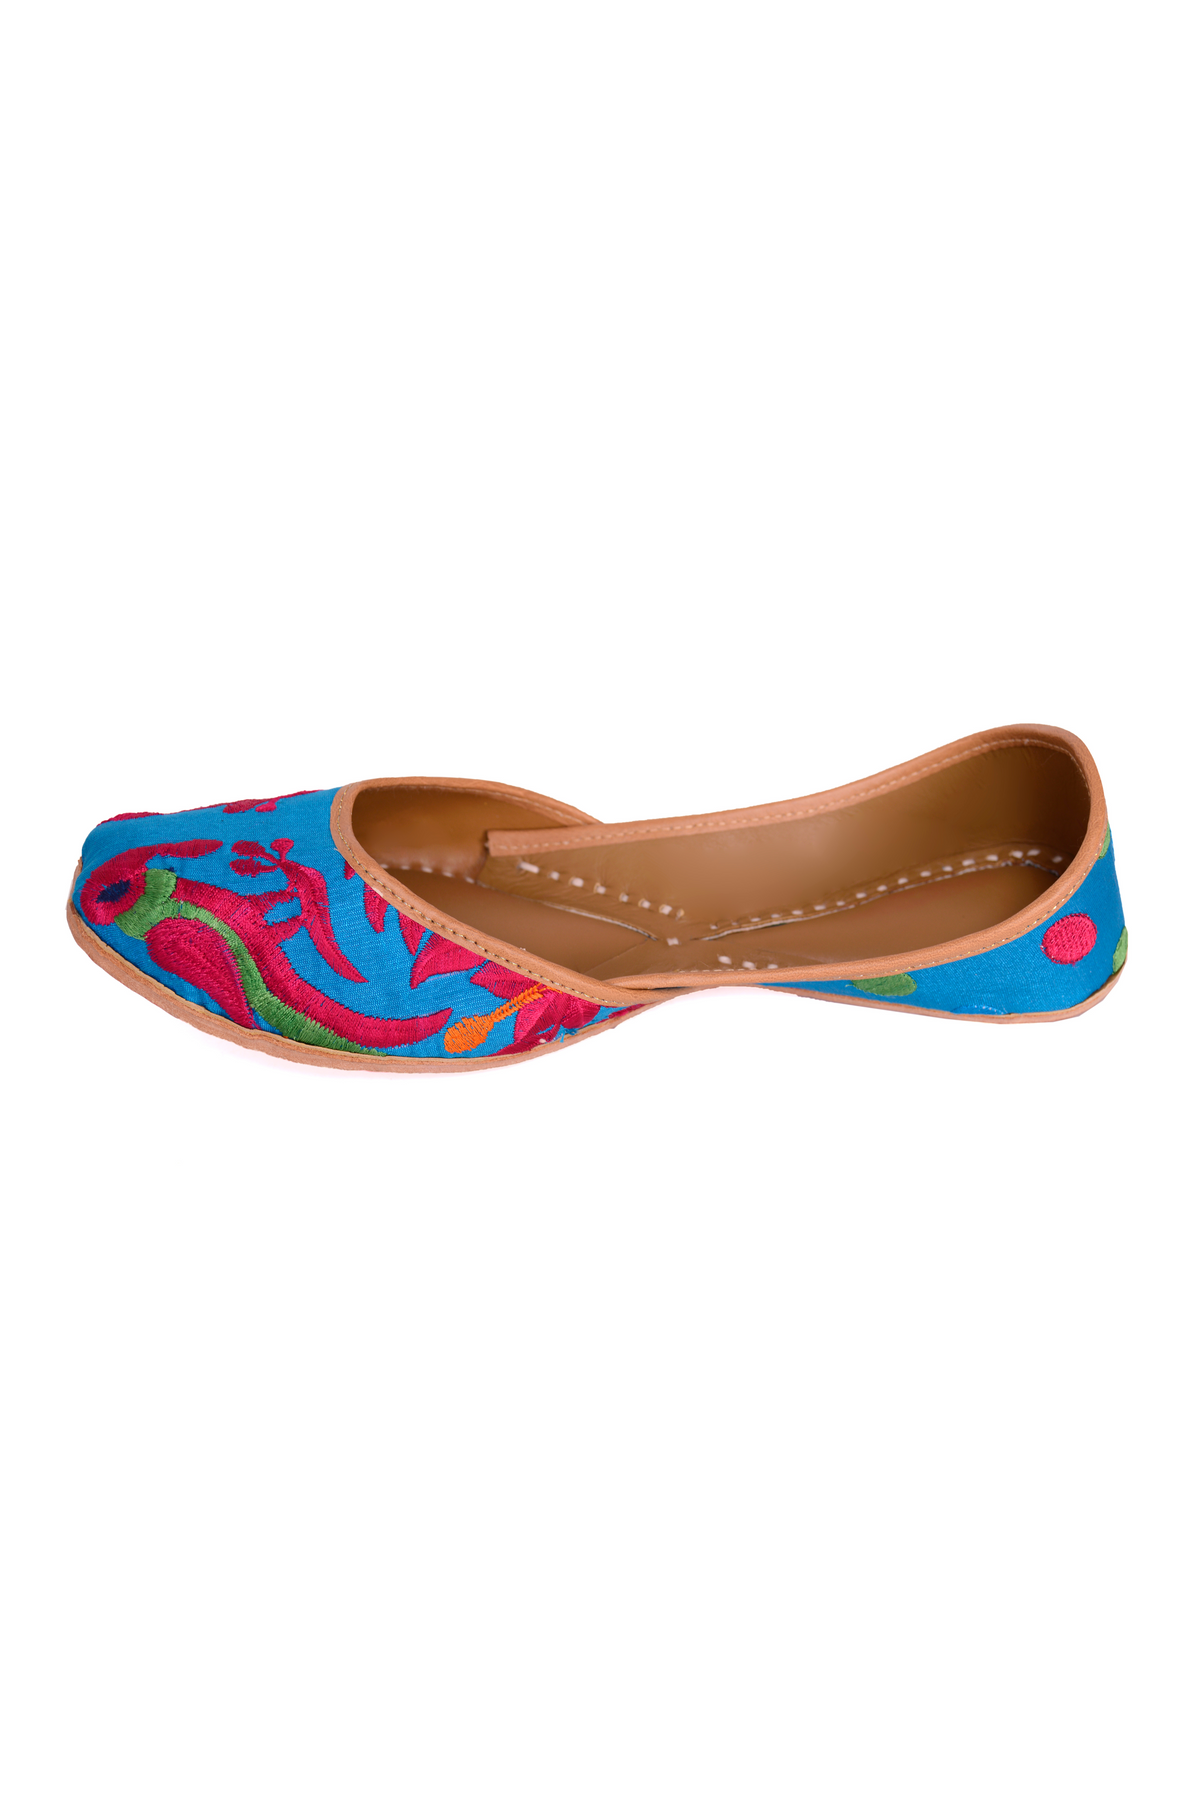 Blue and pink purely parrot jutti